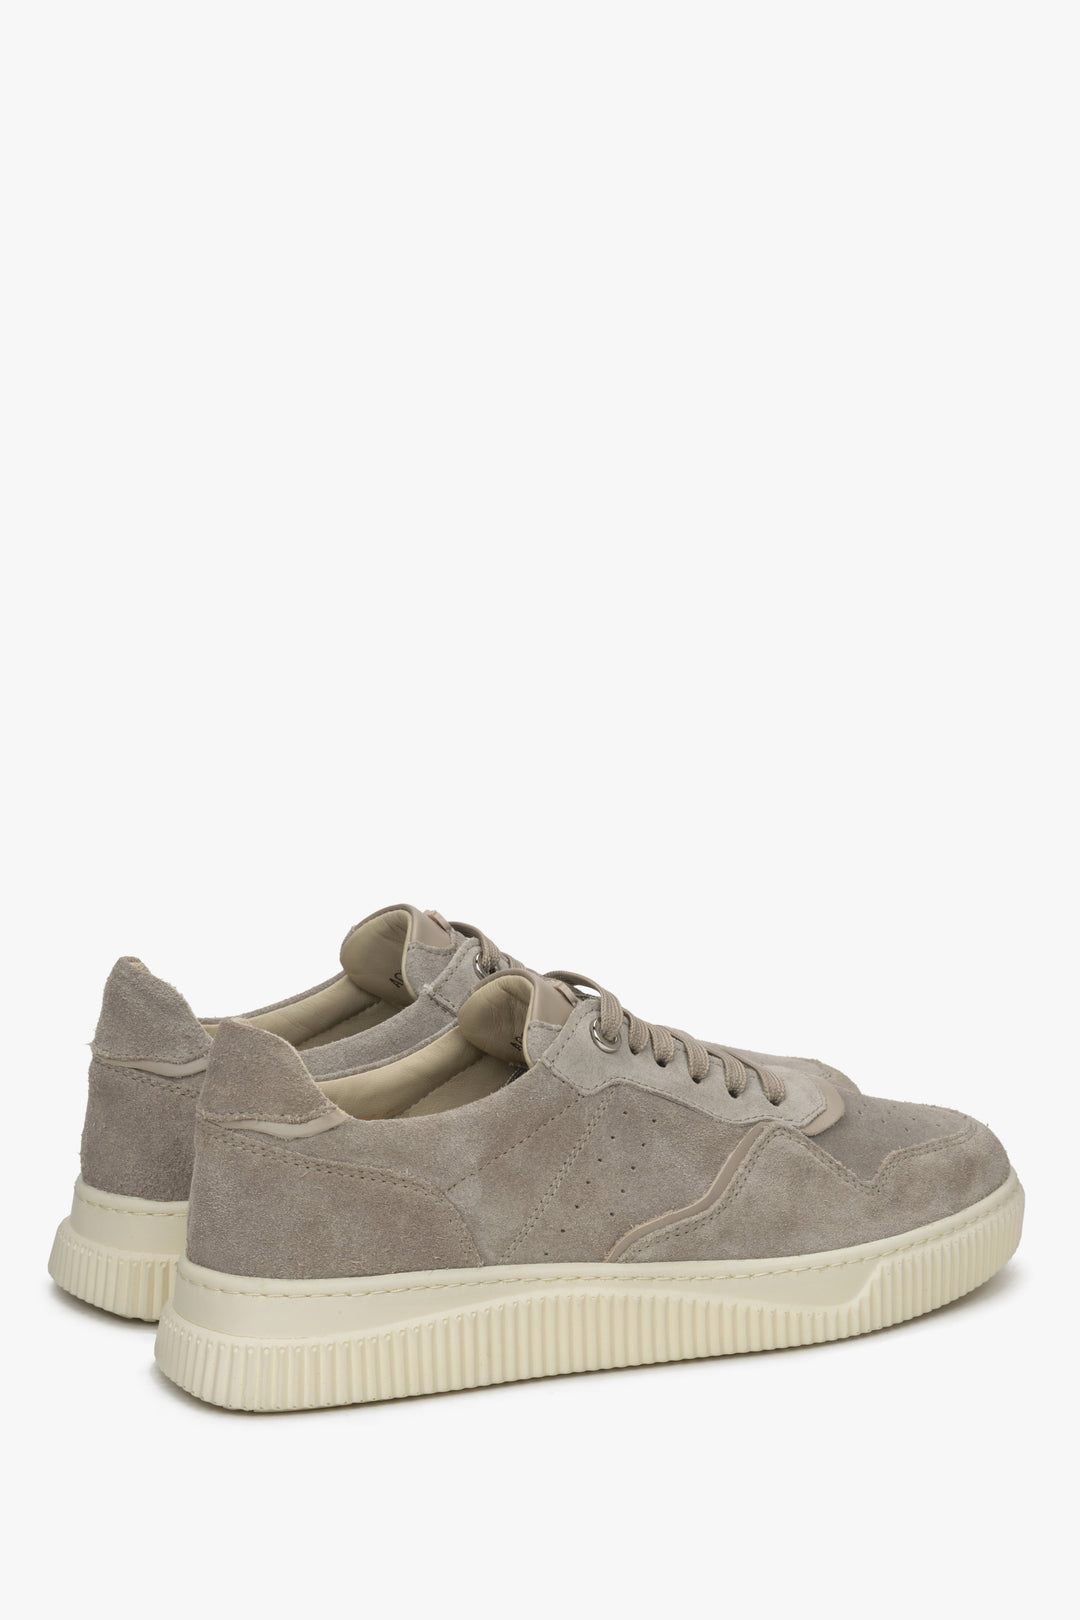 Estro women's grey-beige velour  sneakers - close-up on the side line and heel counter of the shoe.